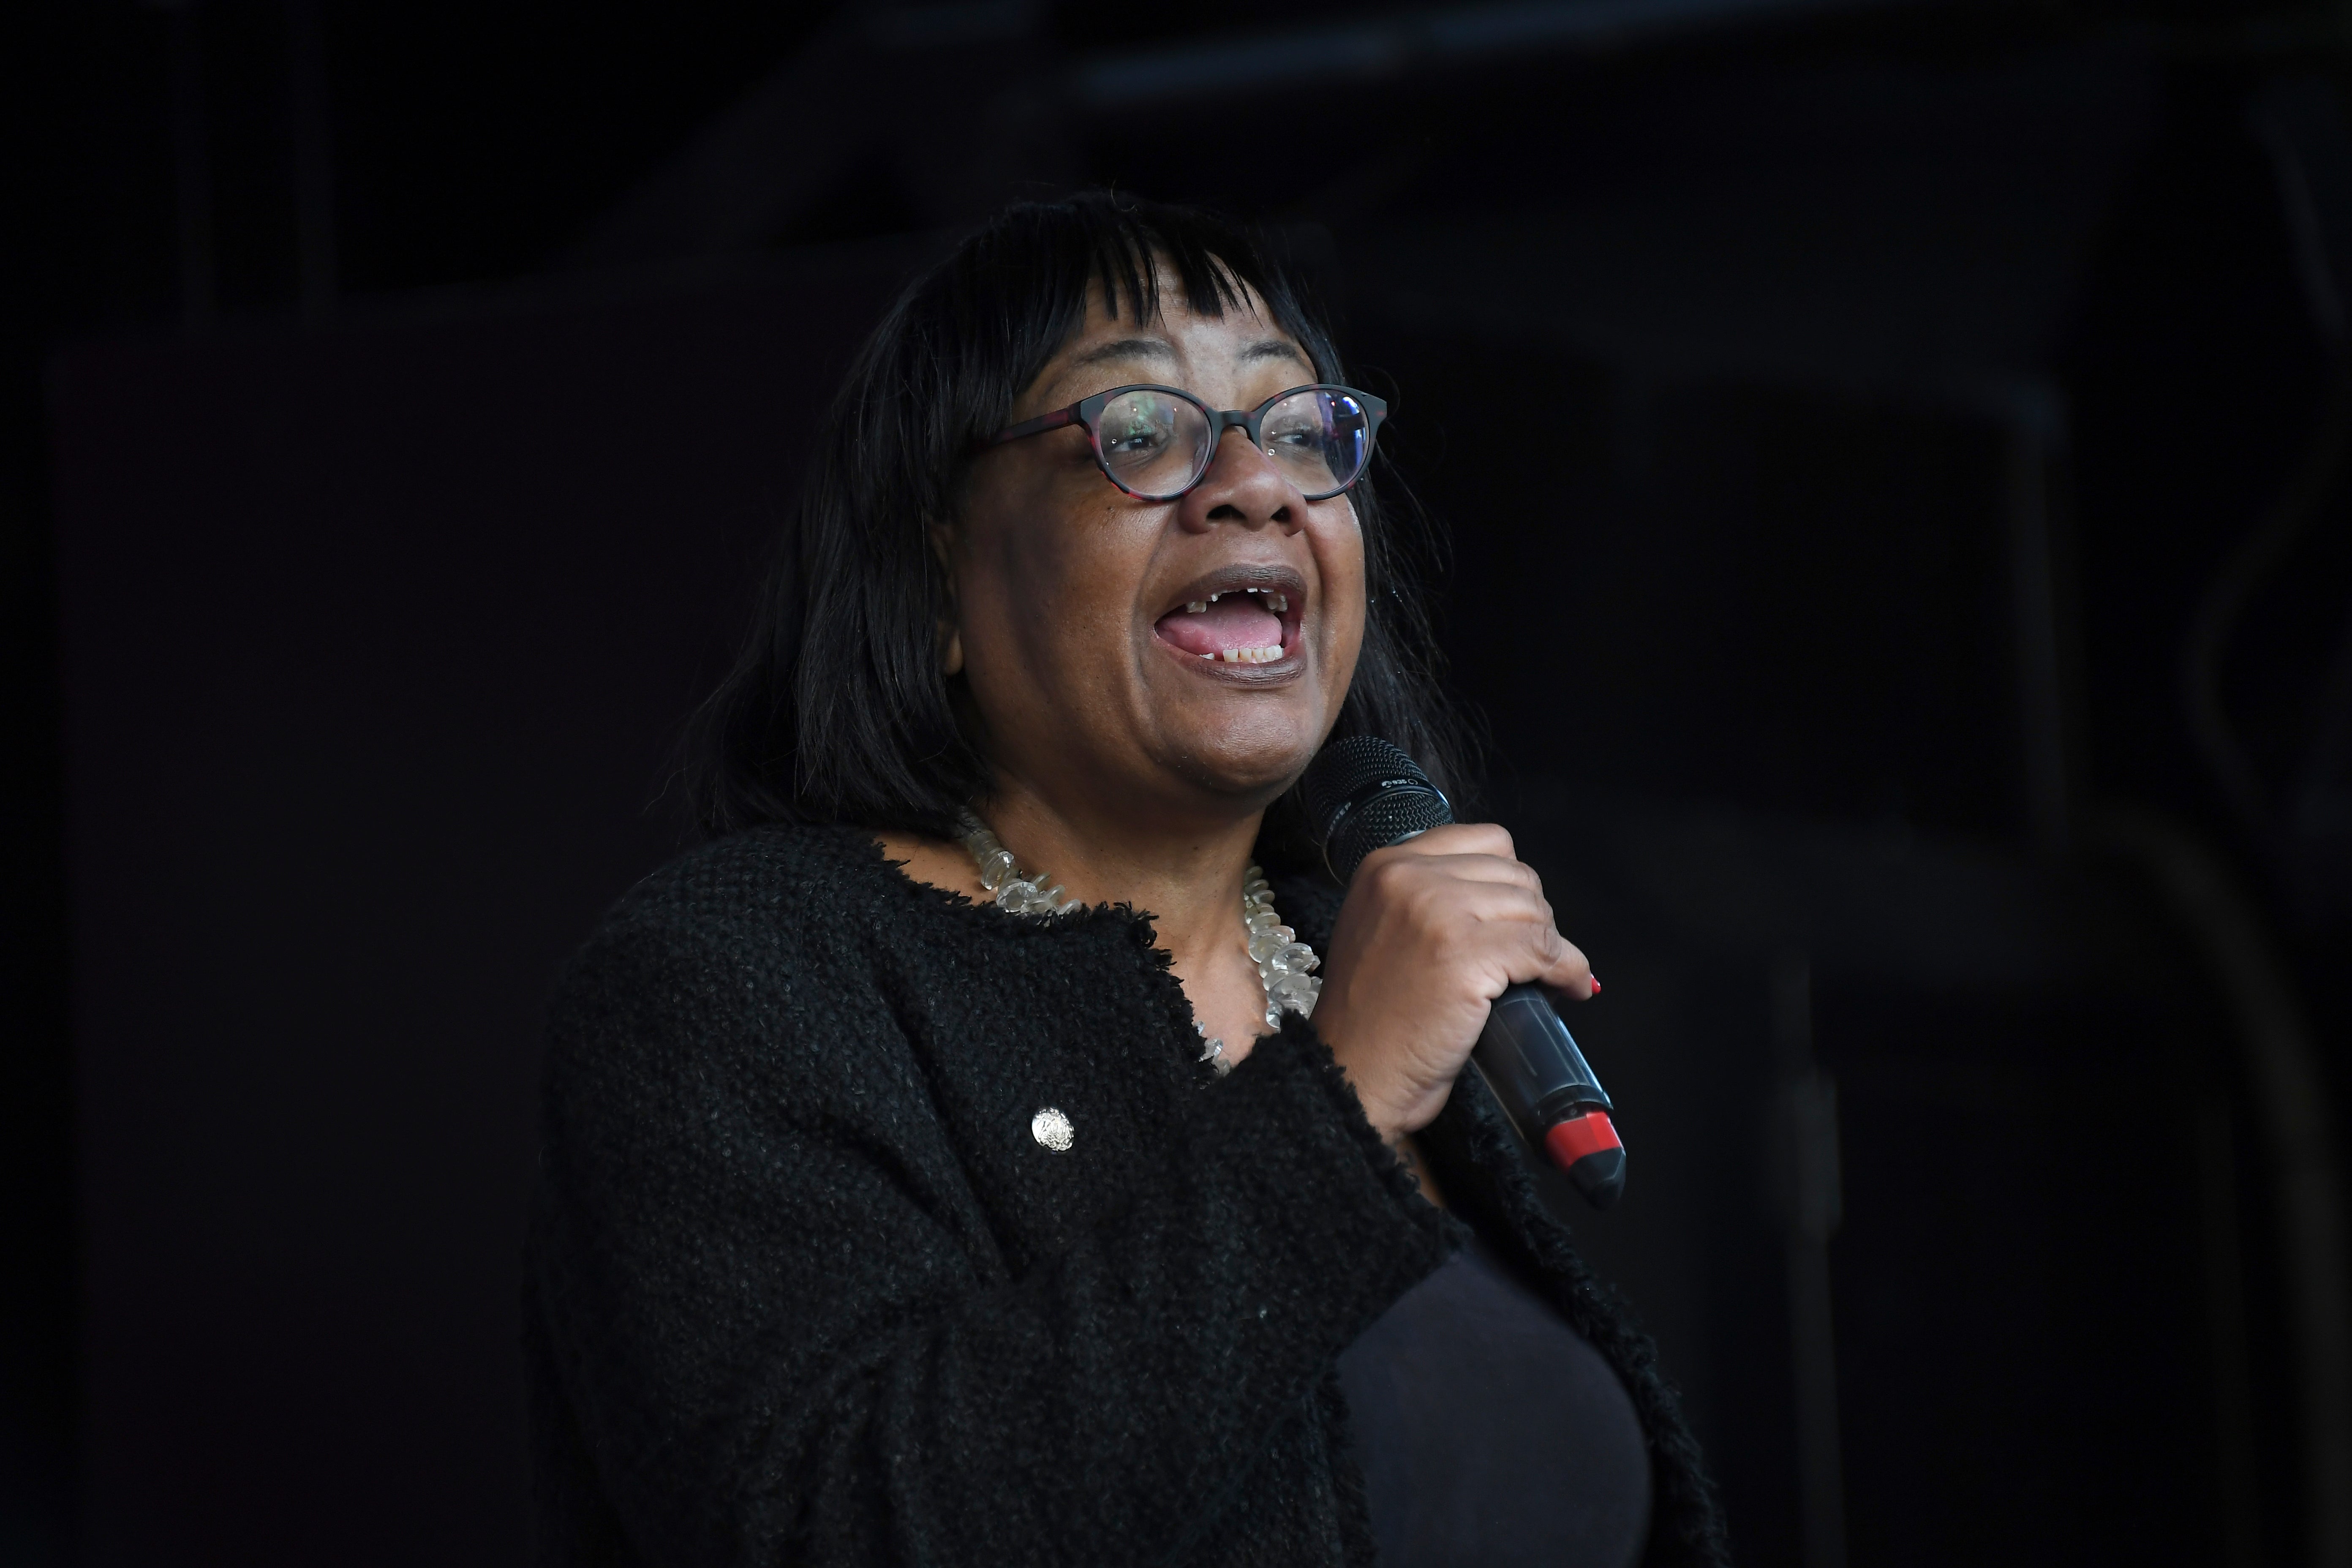 Diane Abbott was suspended last April for an article she wrote about Jewish people